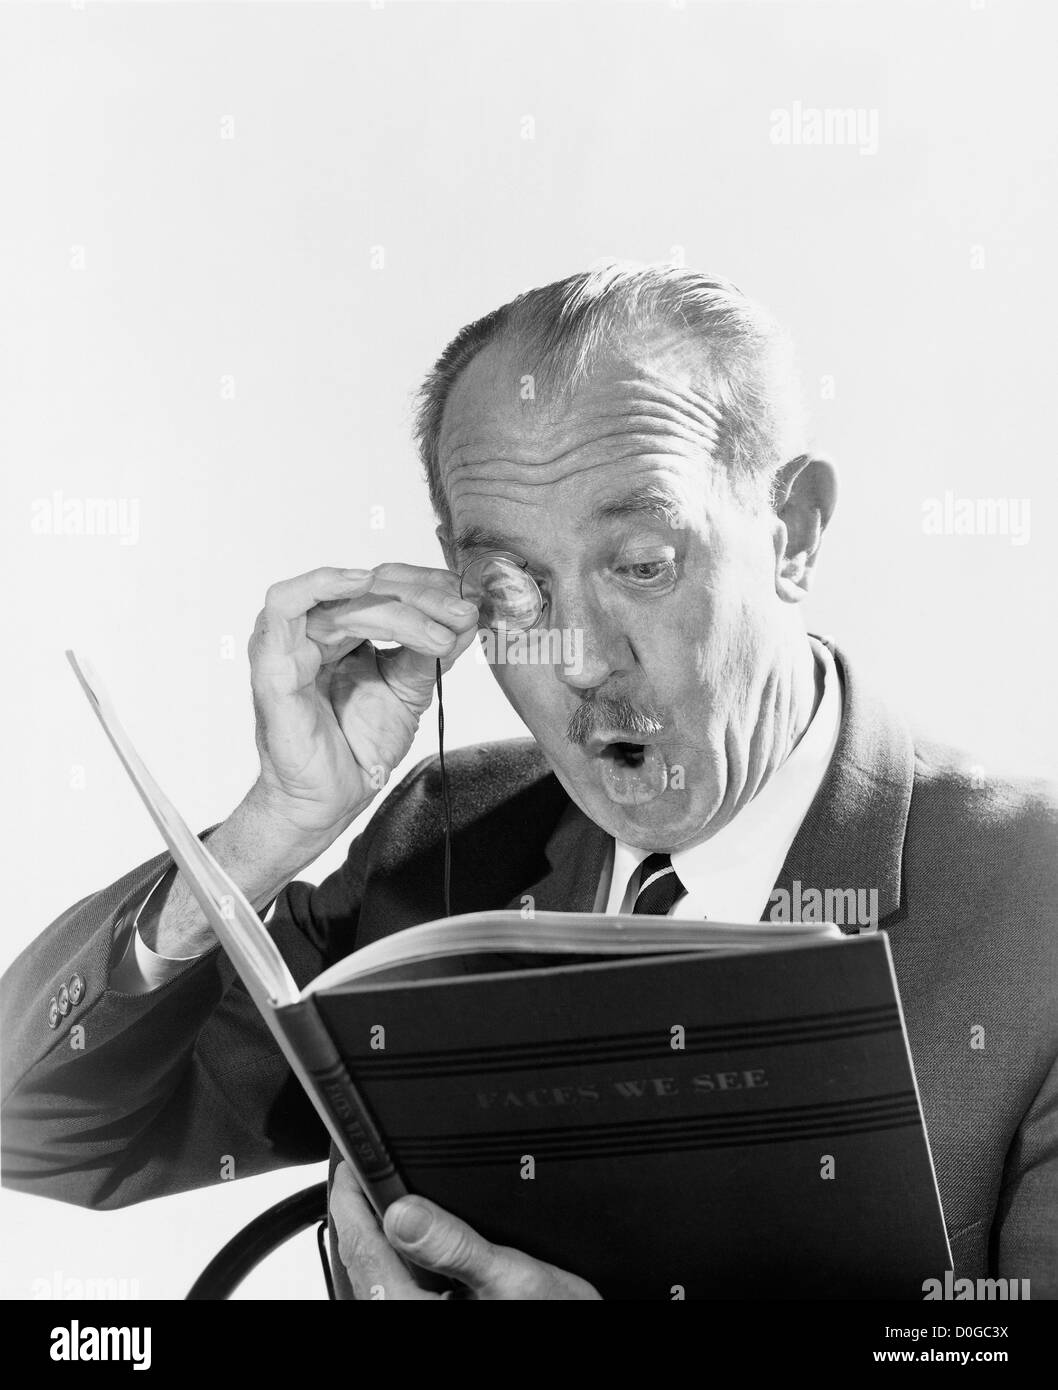 Black and white print of man with monocle looking at a book Stock Photo